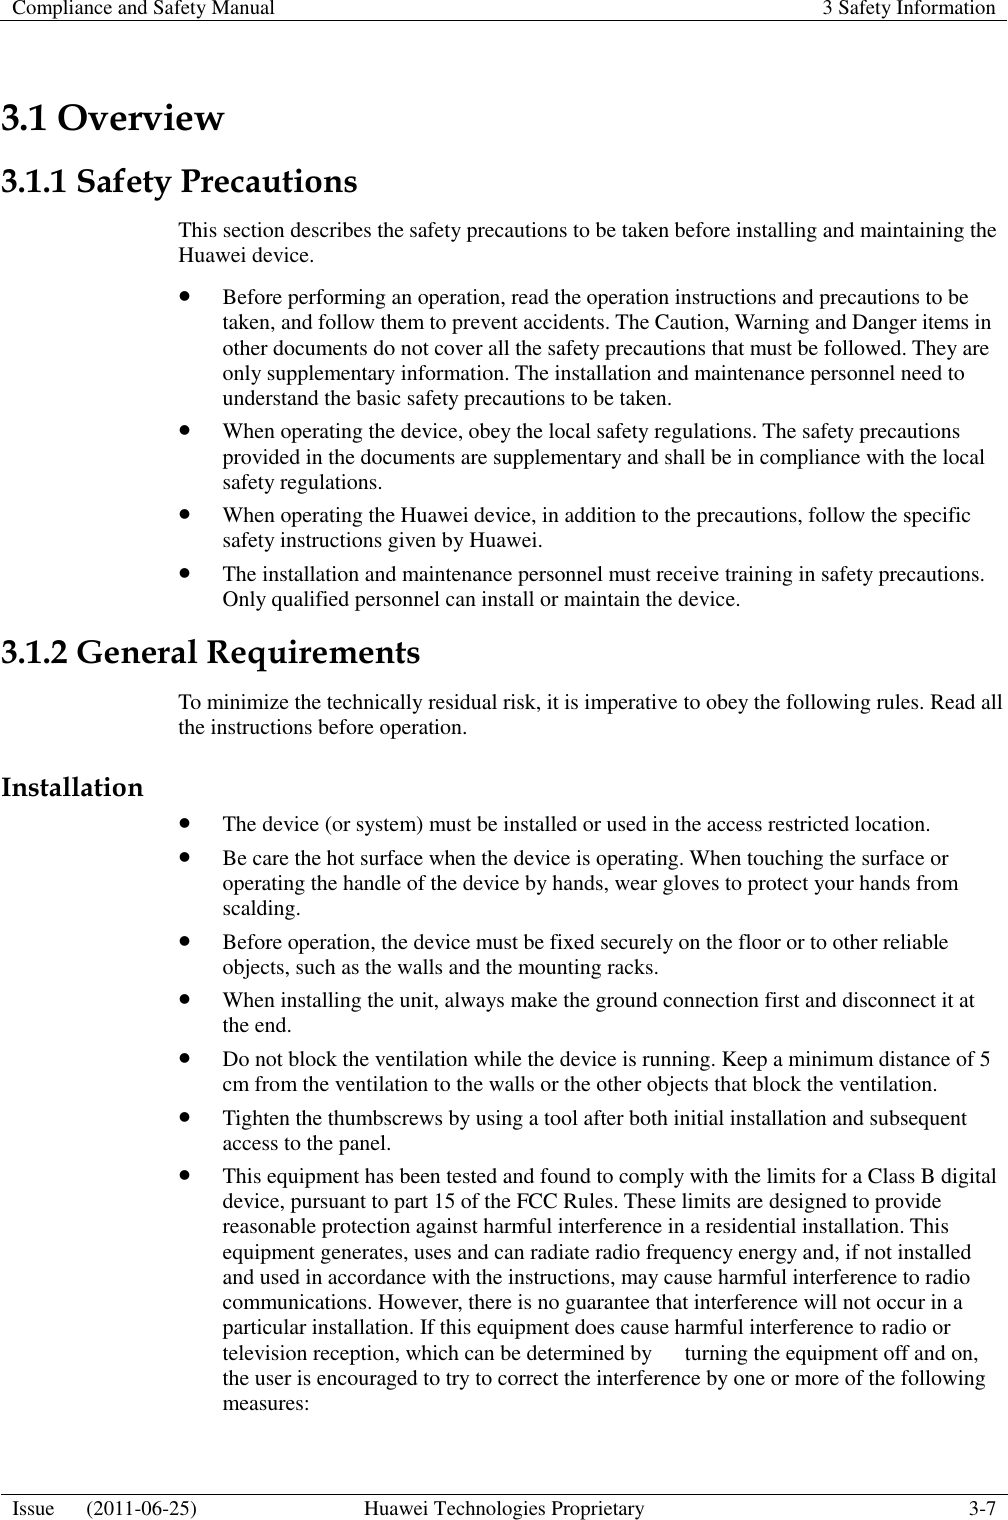 Compliance and Safety Manual 3 Safety Information  Issue      (2011-06-25) Huawei Technologies Proprietary 3-7  3.1 Overview 3.1.1 Safety Precautions This section describes the safety precautions to be taken before installing and maintaining the Huawei device.  Before performing an operation, read the operation instructions and precautions to be taken, and follow them to prevent accidents. The Caution, Warning and Danger items in other documents do not cover all the safety precautions that must be followed. They are only supplementary information. The installation and maintenance personnel need to understand the basic safety precautions to be taken.  When operating the device, obey the local safety regulations. The safety precautions provided in the documents are supplementary and shall be in compliance with the local safety regulations.  When operating the Huawei device, in addition to the precautions, follow the specific safety instructions given by Huawei.  The installation and maintenance personnel must receive training in safety precautions. Only qualified personnel can install or maintain the device. 3.1.2 General Requirements To minimize the technically residual risk, it is imperative to obey the following rules. Read all the instructions before operation. Installation  The device (or system) must be installed or used in the access restricted location.  Be care the hot surface when the device is operating. When touching the surface or operating the handle of the device by hands, wear gloves to protect your hands from scalding.  Before operation, the device must be fixed securely on the floor or to other reliable objects, such as the walls and the mounting racks.  When installing the unit, always make the ground connection first and disconnect it at the end.  Do not block the ventilation while the device is running. Keep a minimum distance of 5 cm from the ventilation to the walls or the other objects that block the ventilation.  Tighten the thumbscrews by using a tool after both initial installation and subsequent access to the panel.  This equipment has been tested and found to comply with the limits for a Class B digital device, pursuant to part 15 of the FCC Rules. These limits are designed to provide reasonable protection against harmful interference in a residential installation. This equipment generates, uses and can radiate radio frequency energy and, if not installed and used in accordance with the instructions, may cause harmful interference to radio communications. However, there is no guarantee that interference will not occur in a particular installation. If this equipment does cause harmful interference to radio or television reception, which can be determined by      turning the equipment off and on, the user is encouraged to try to correct the interference by one or more of the following measures: 